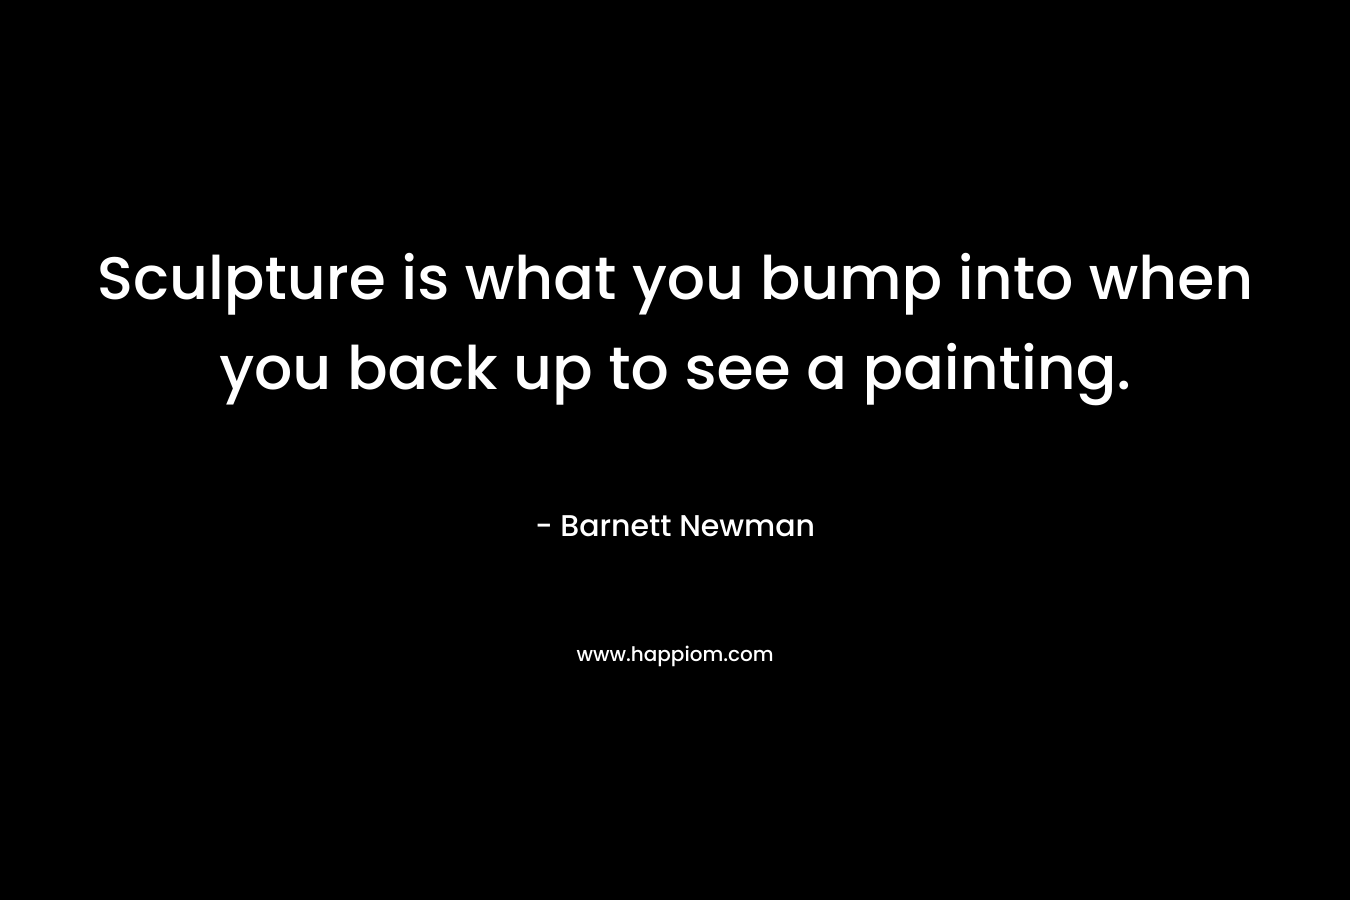 Sculpture is what you bump into when you back up to see a painting. – Barnett Newman